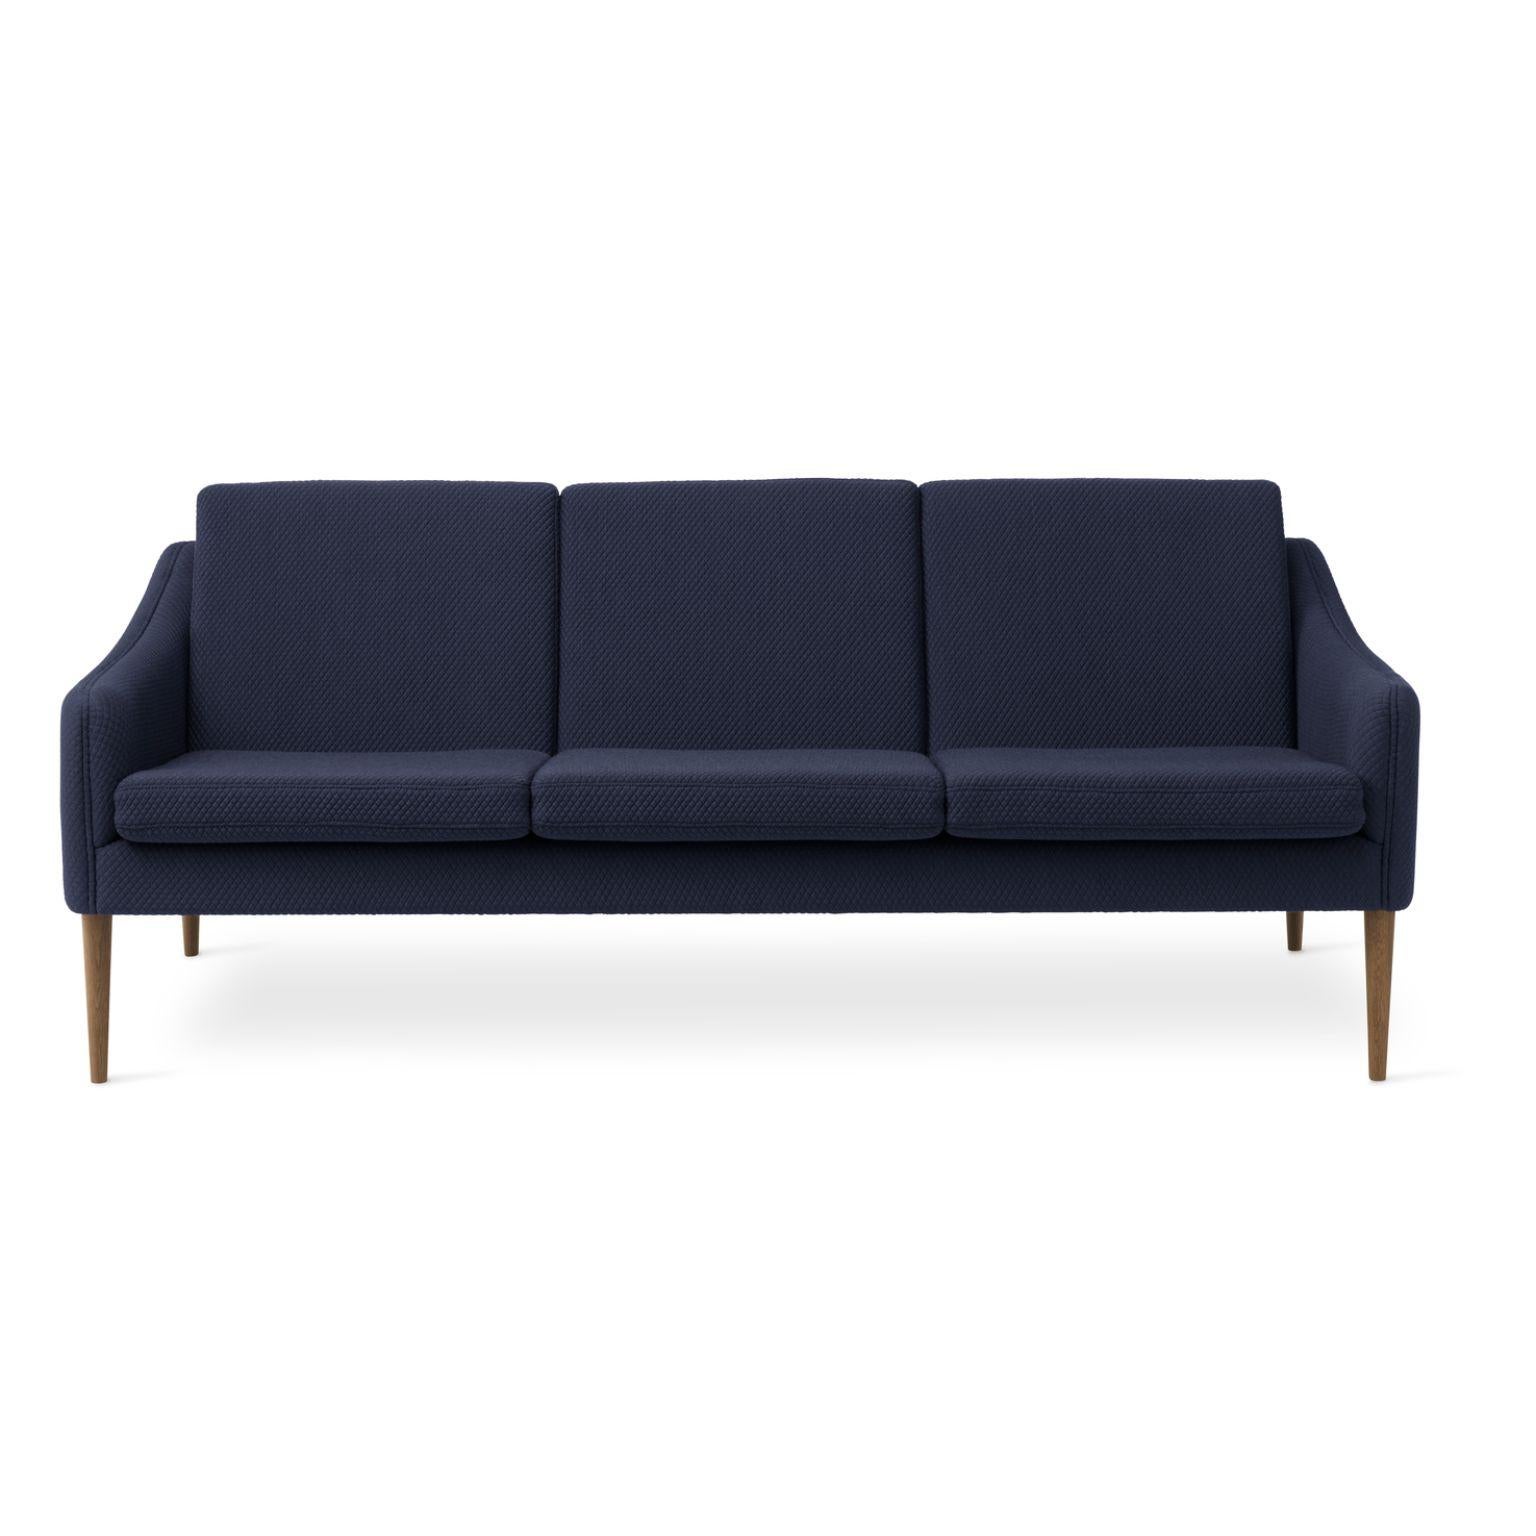 Mr Olsen 3 seater Oak Mosaic Royal Blue by Warm Nordic
Dimensions: D201 x W79 x H 78/46 cm
Material: Textile upholstery, Foam, Spring system, Solid oiled oak legs, Solid smoked oak legs.
Weight: 50 kg
Also available in different colors and